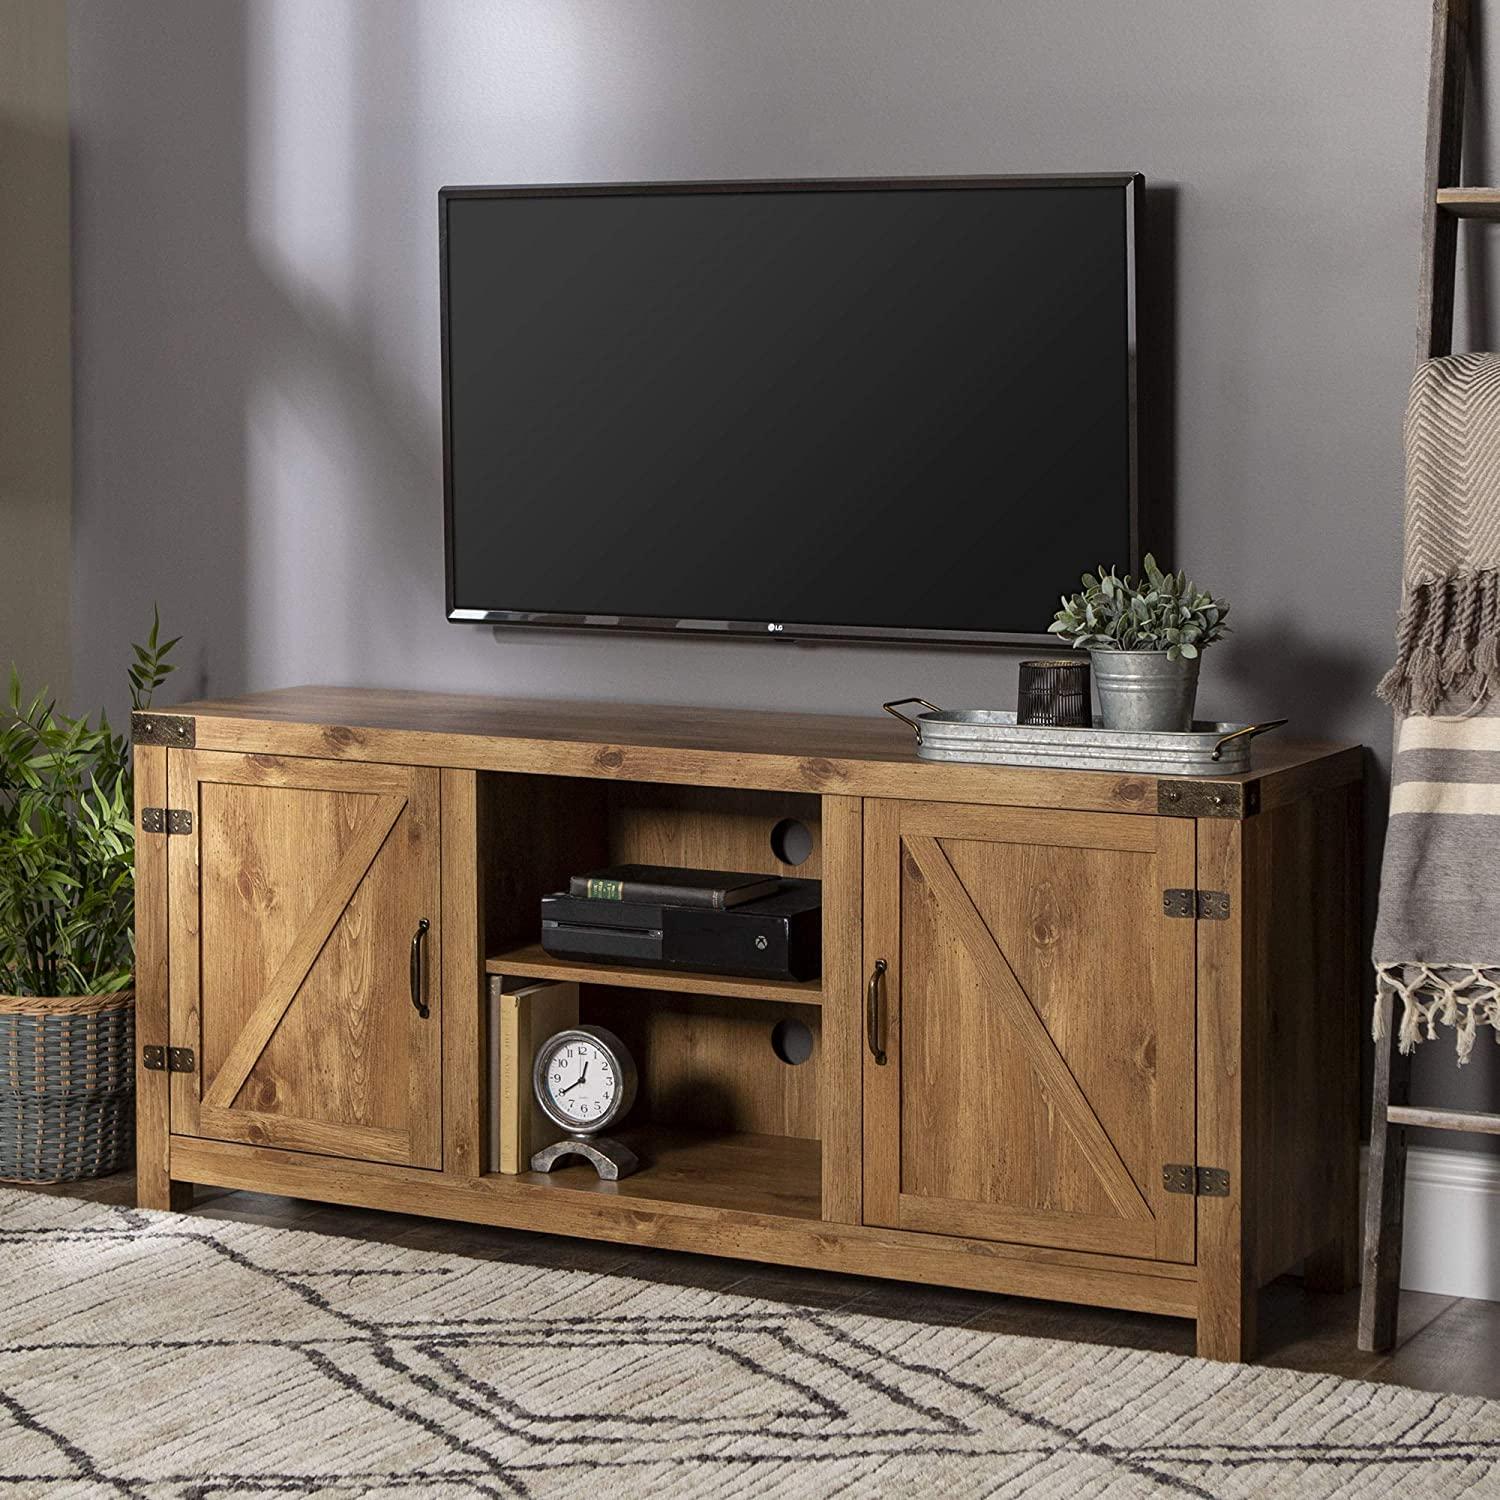 Walker Edison Georgetown Modern Farmhouse TV Stand for $127.22 Shipped